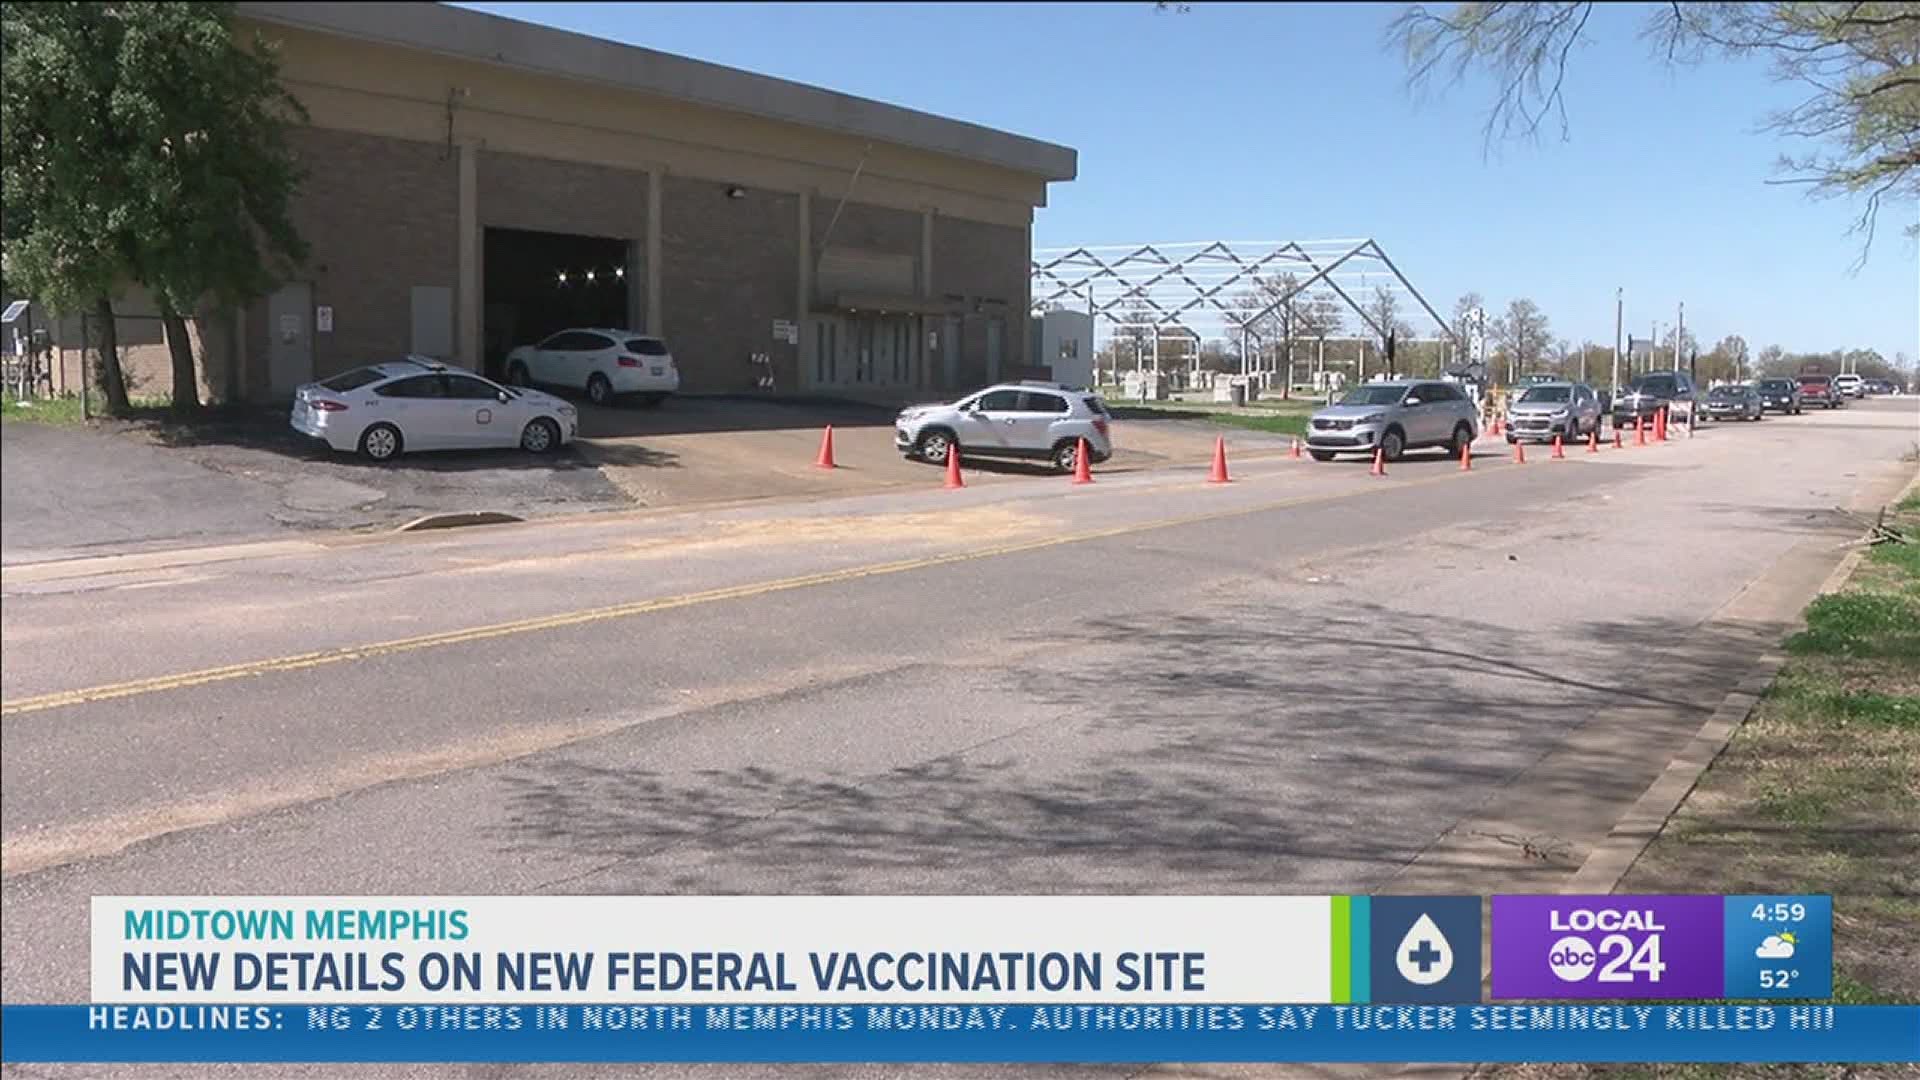 The FEMA community vaccination center next to Liberty Bowl will be able to vaccinate 21,000 a week, which frees up local staff to provide doses elsewhere.